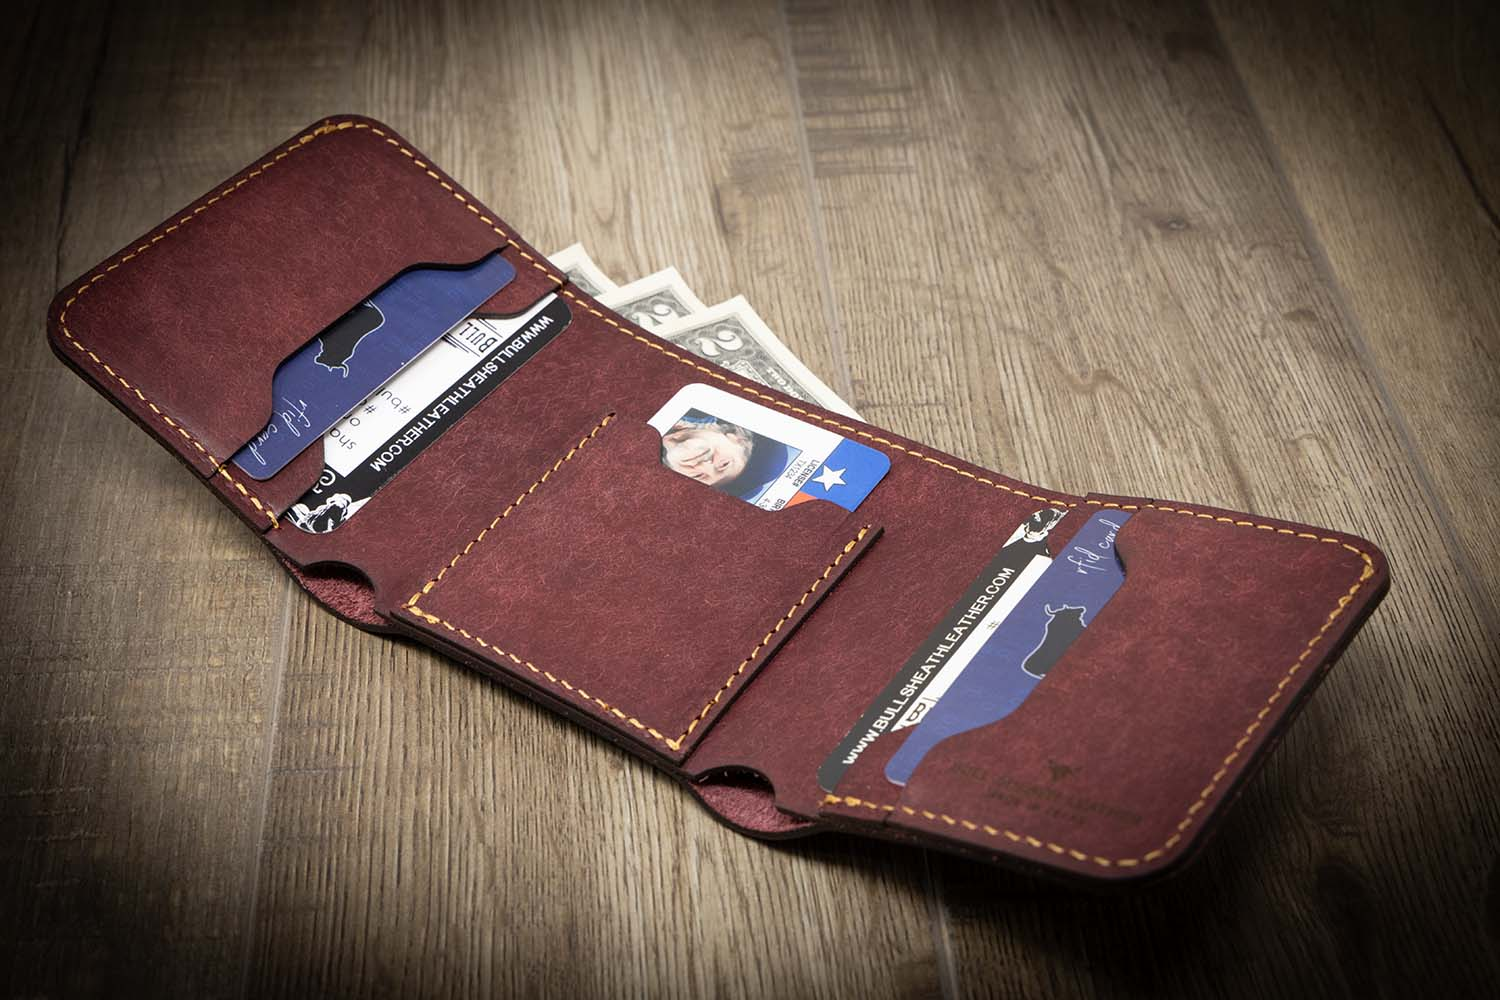 A trifold ID wallet with traditional style and features badge